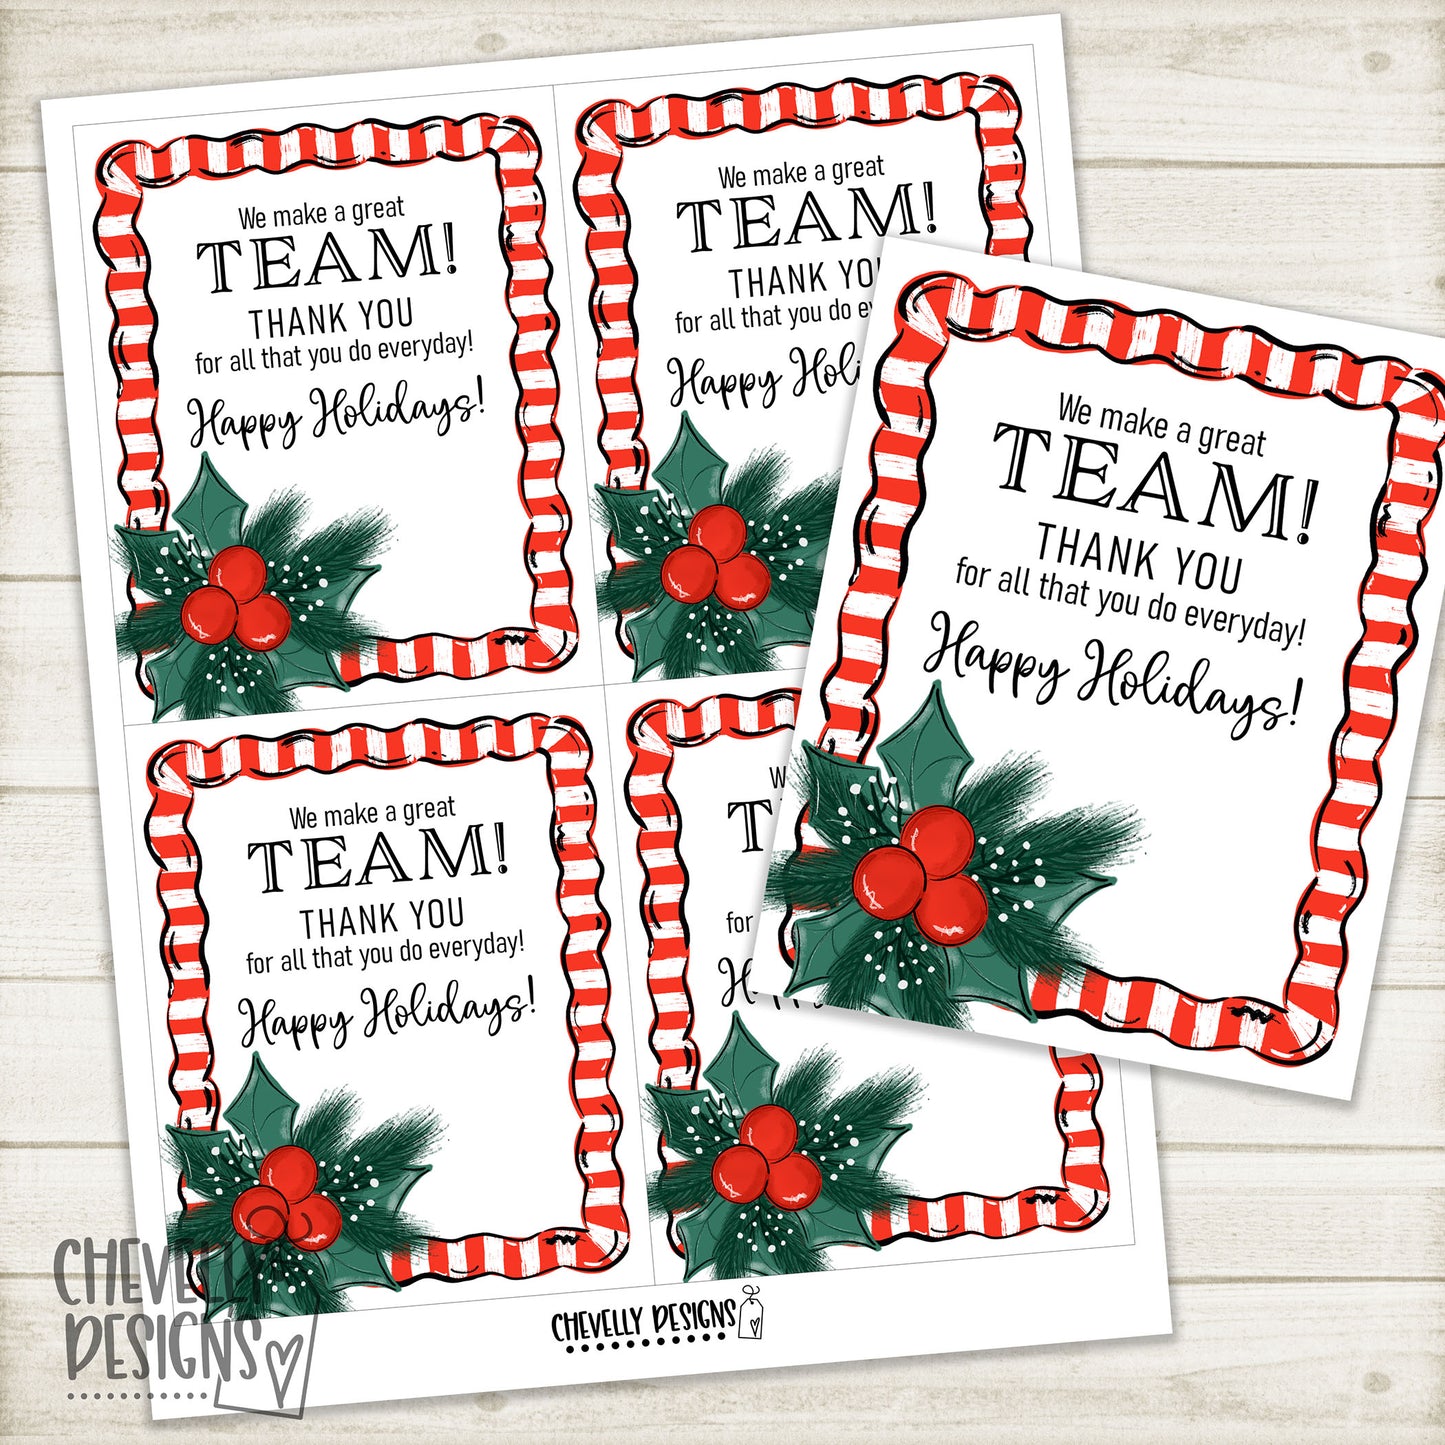 Printable Christmas Gift Tags - We make a Great Team >>>Instant Digital Download<<<